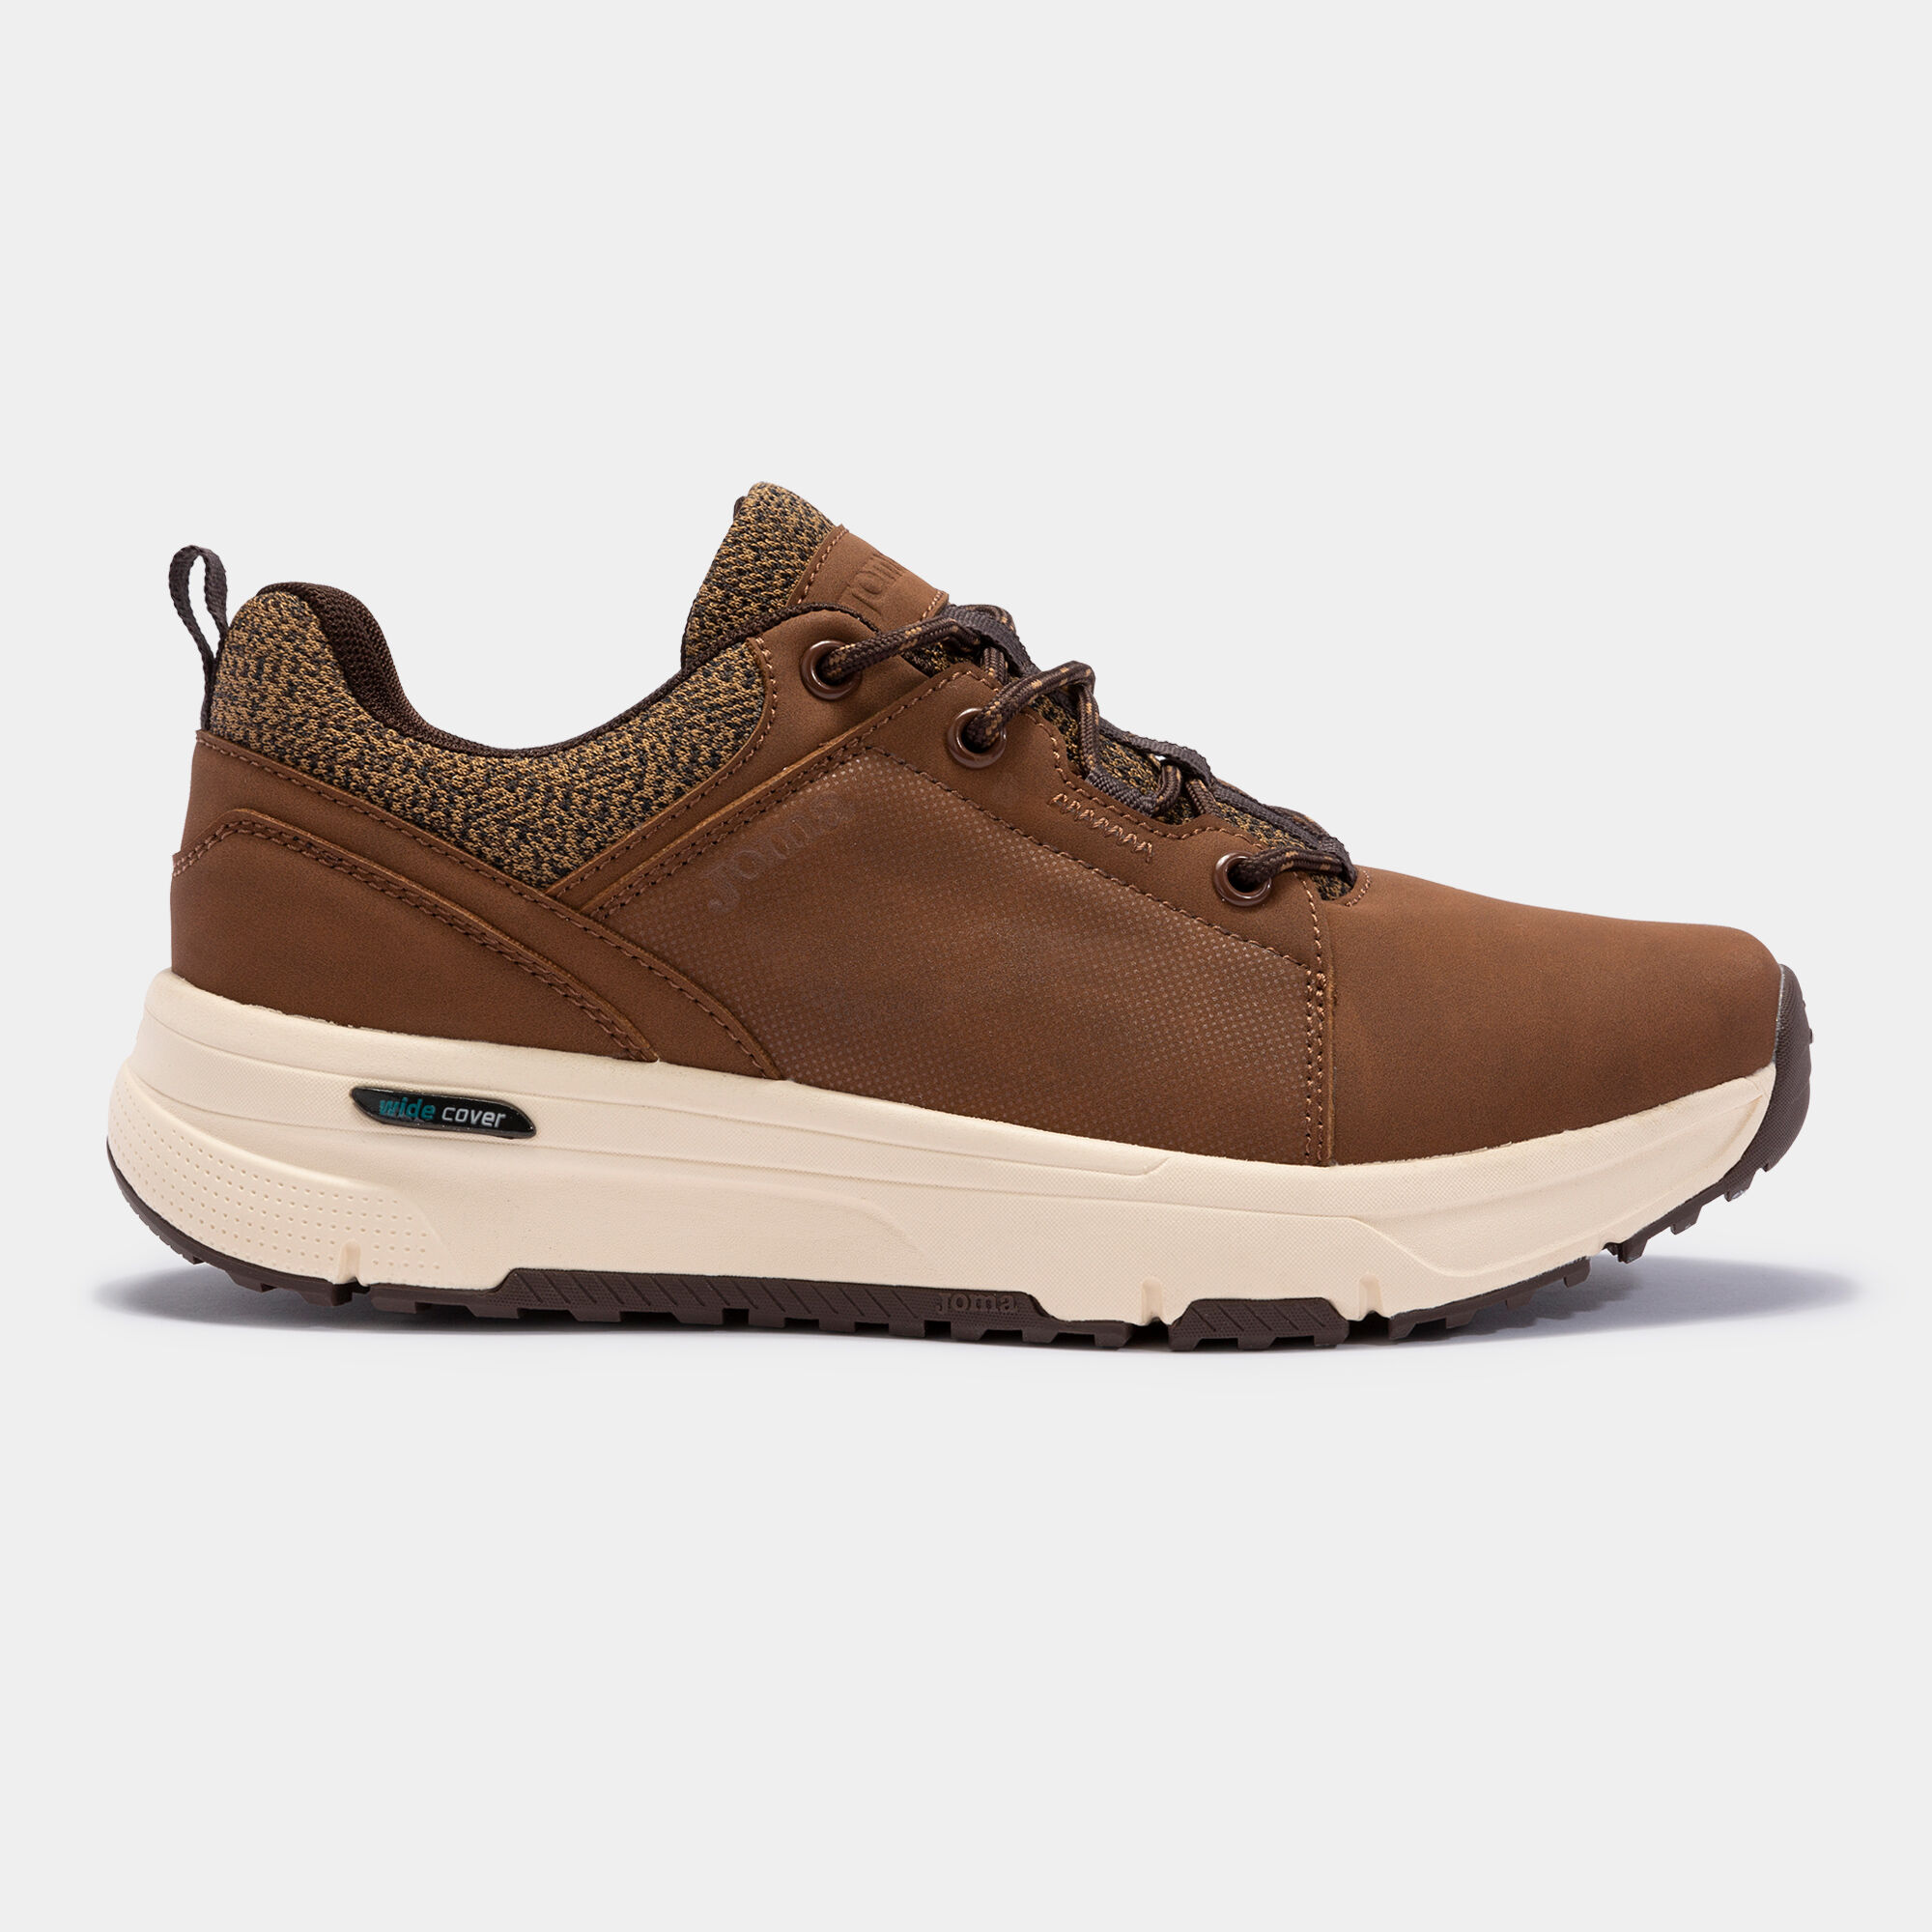 CHAUSSURES CASUAL SANABRIA 22 HOMME CAMEL